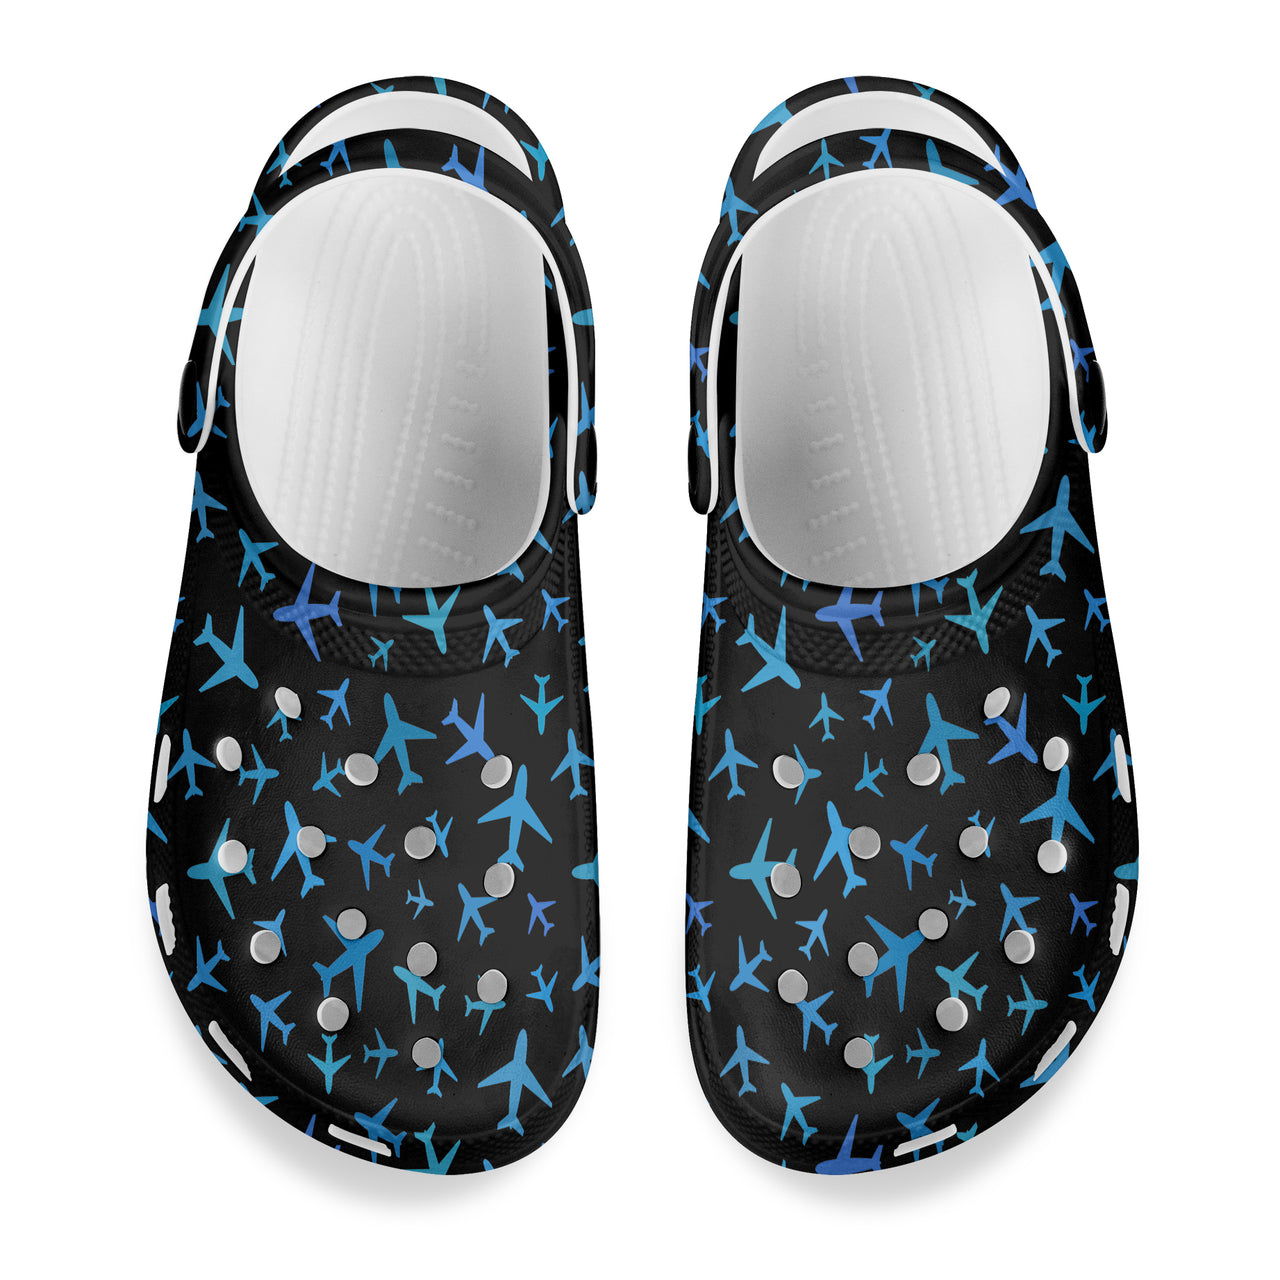 Many Airplanes Black Designed Hole Shoes & Slippers (WOMEN)